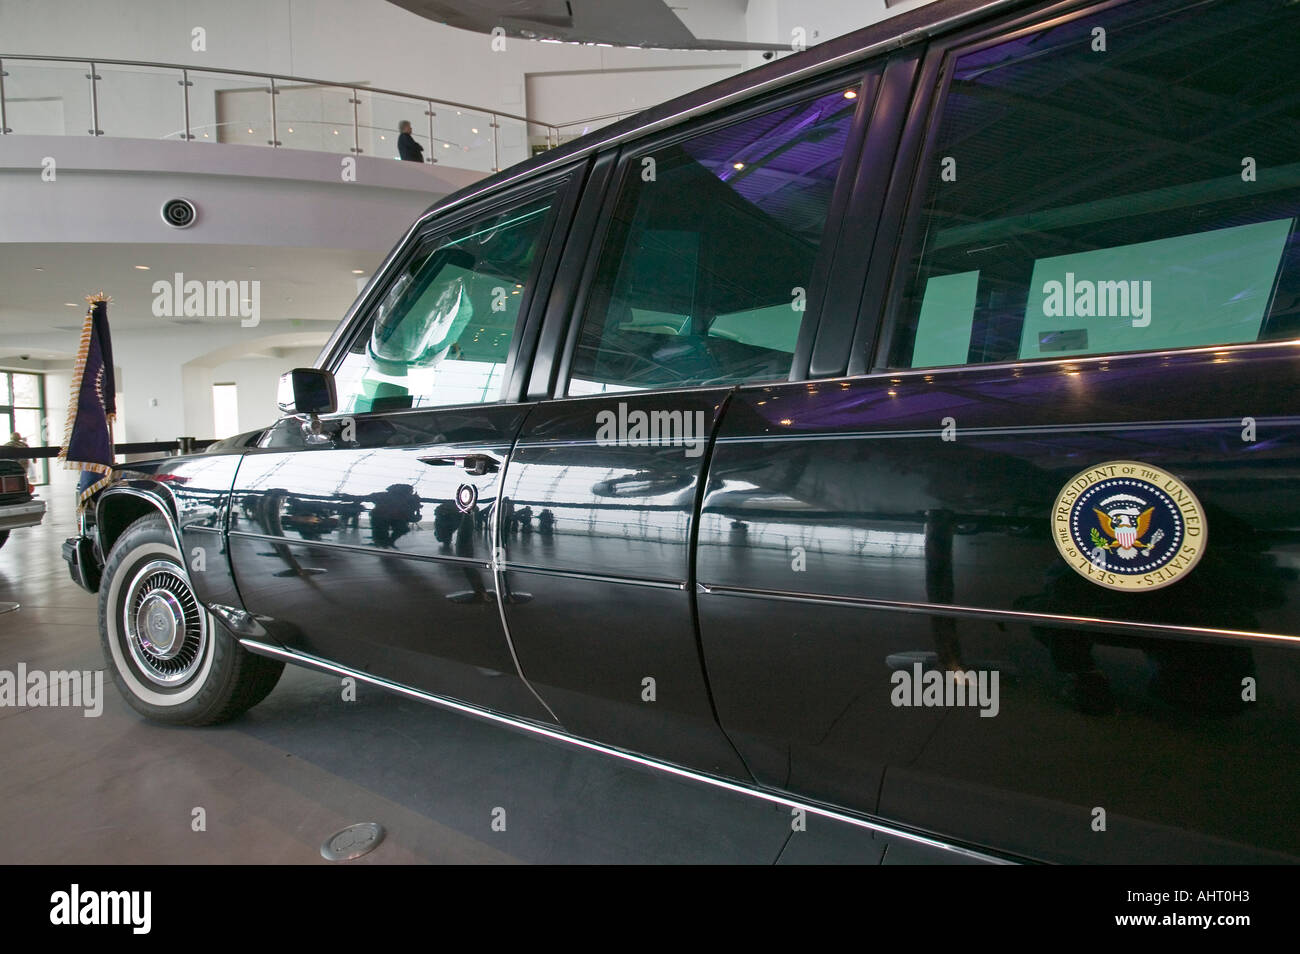 Presidential motorcade on display at the Ronald Reagan Presidential Library and Museum Simi Valley CA Stock Photo